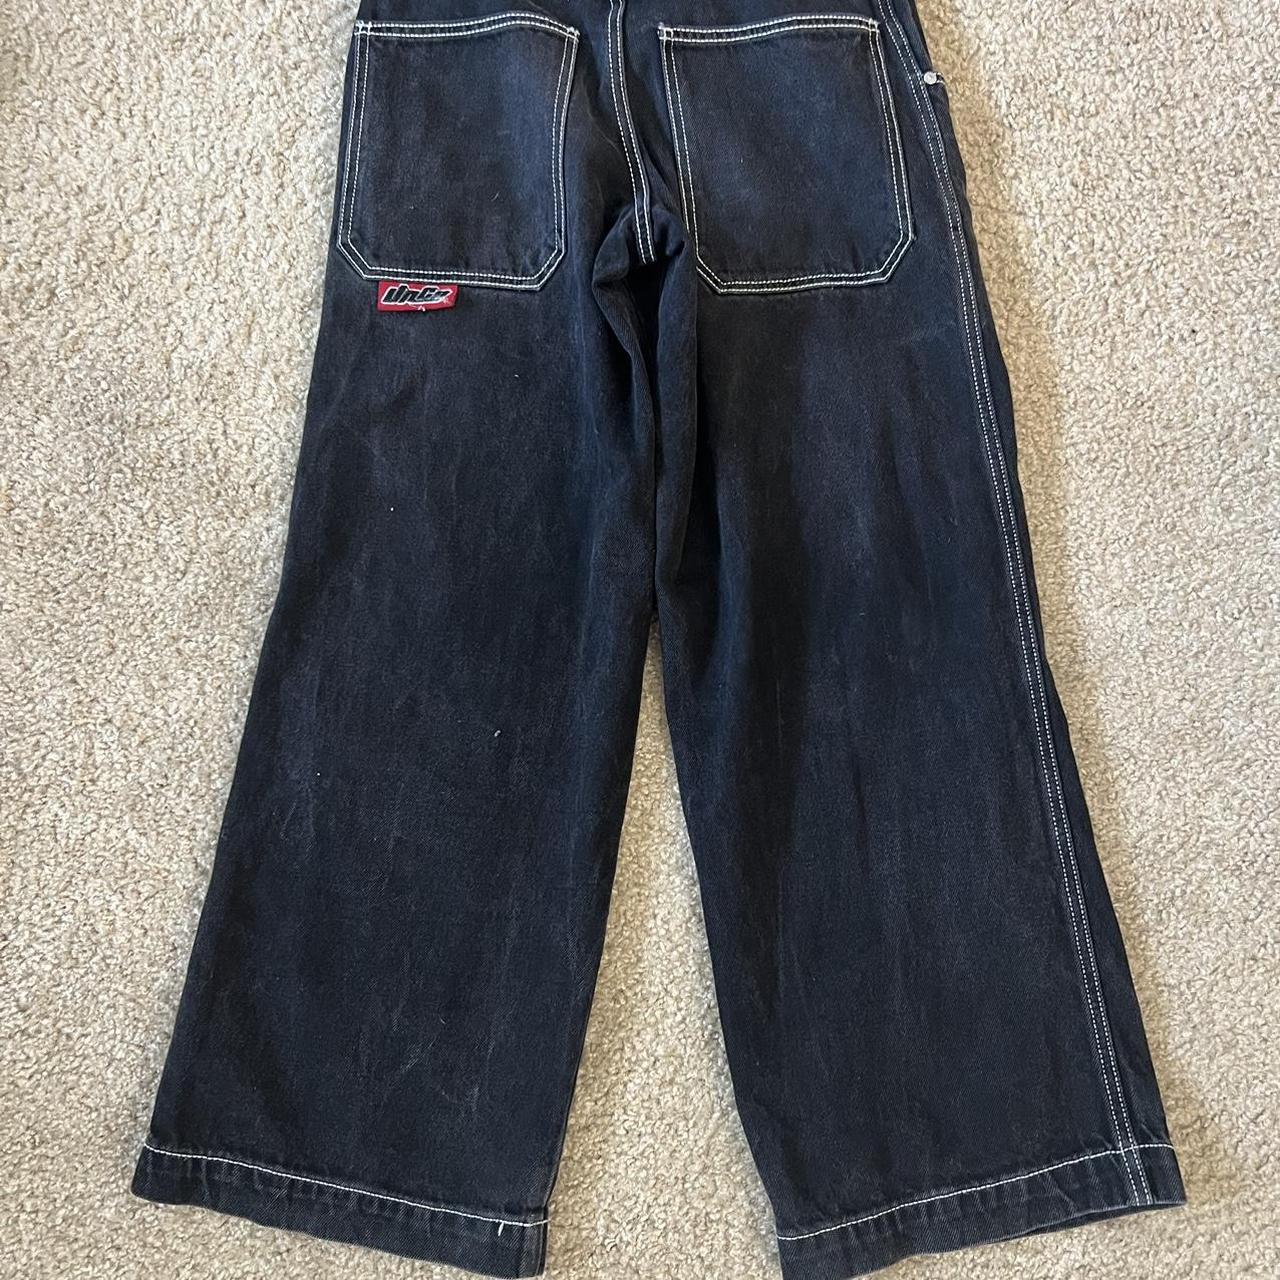 JNCO Pipes - Black 28 x 30 worn a good amount of... - Depop